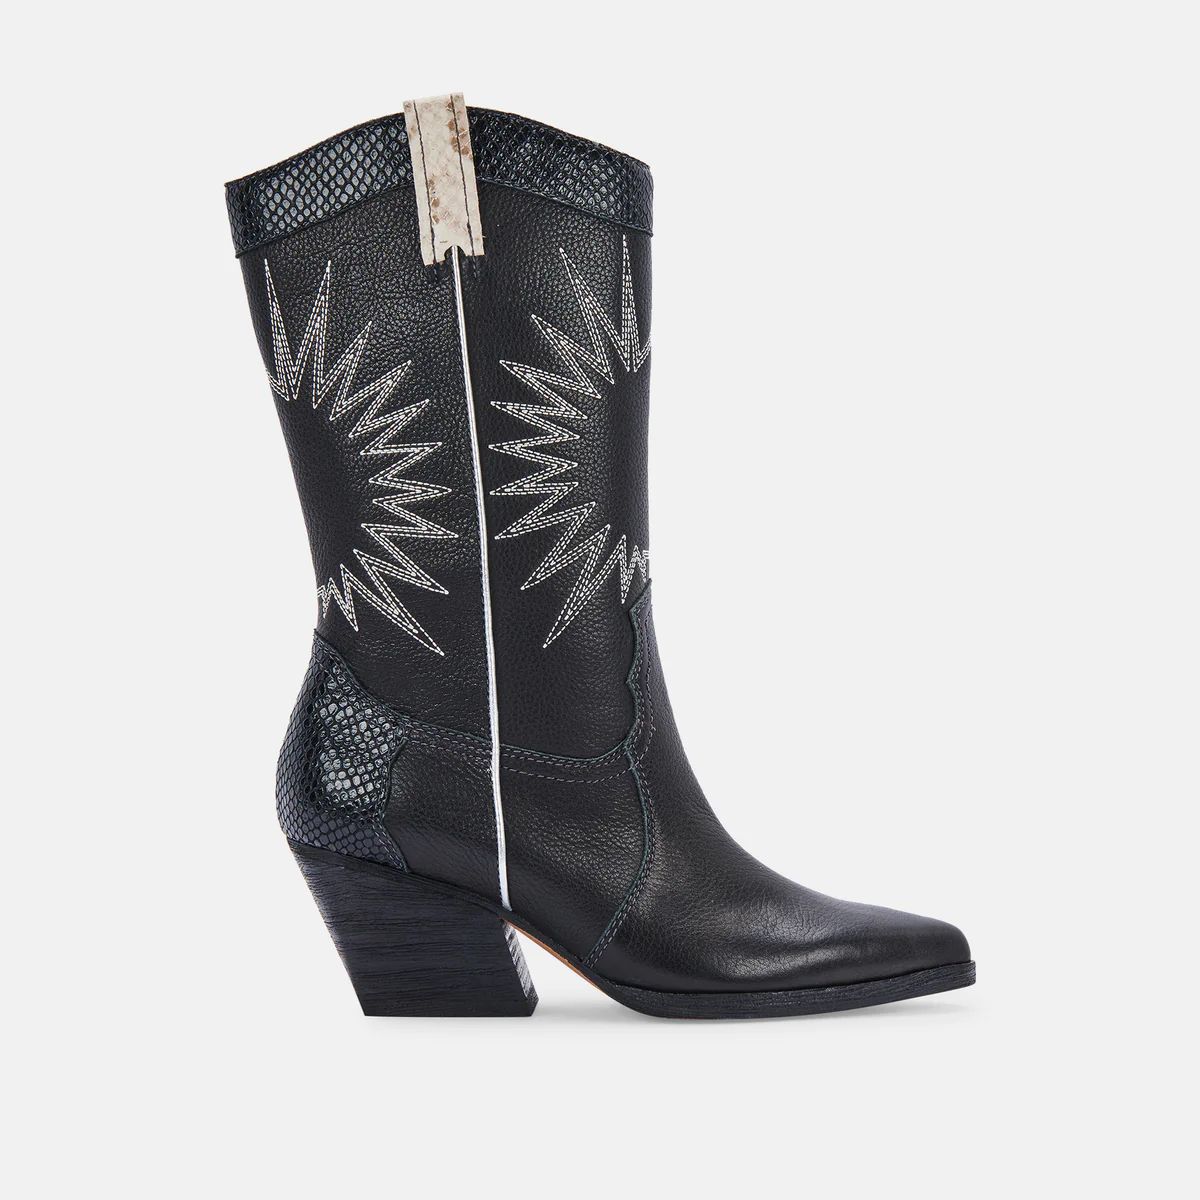 LAWSON BOOTS IN BLACK LEATHER | DolceVita.com